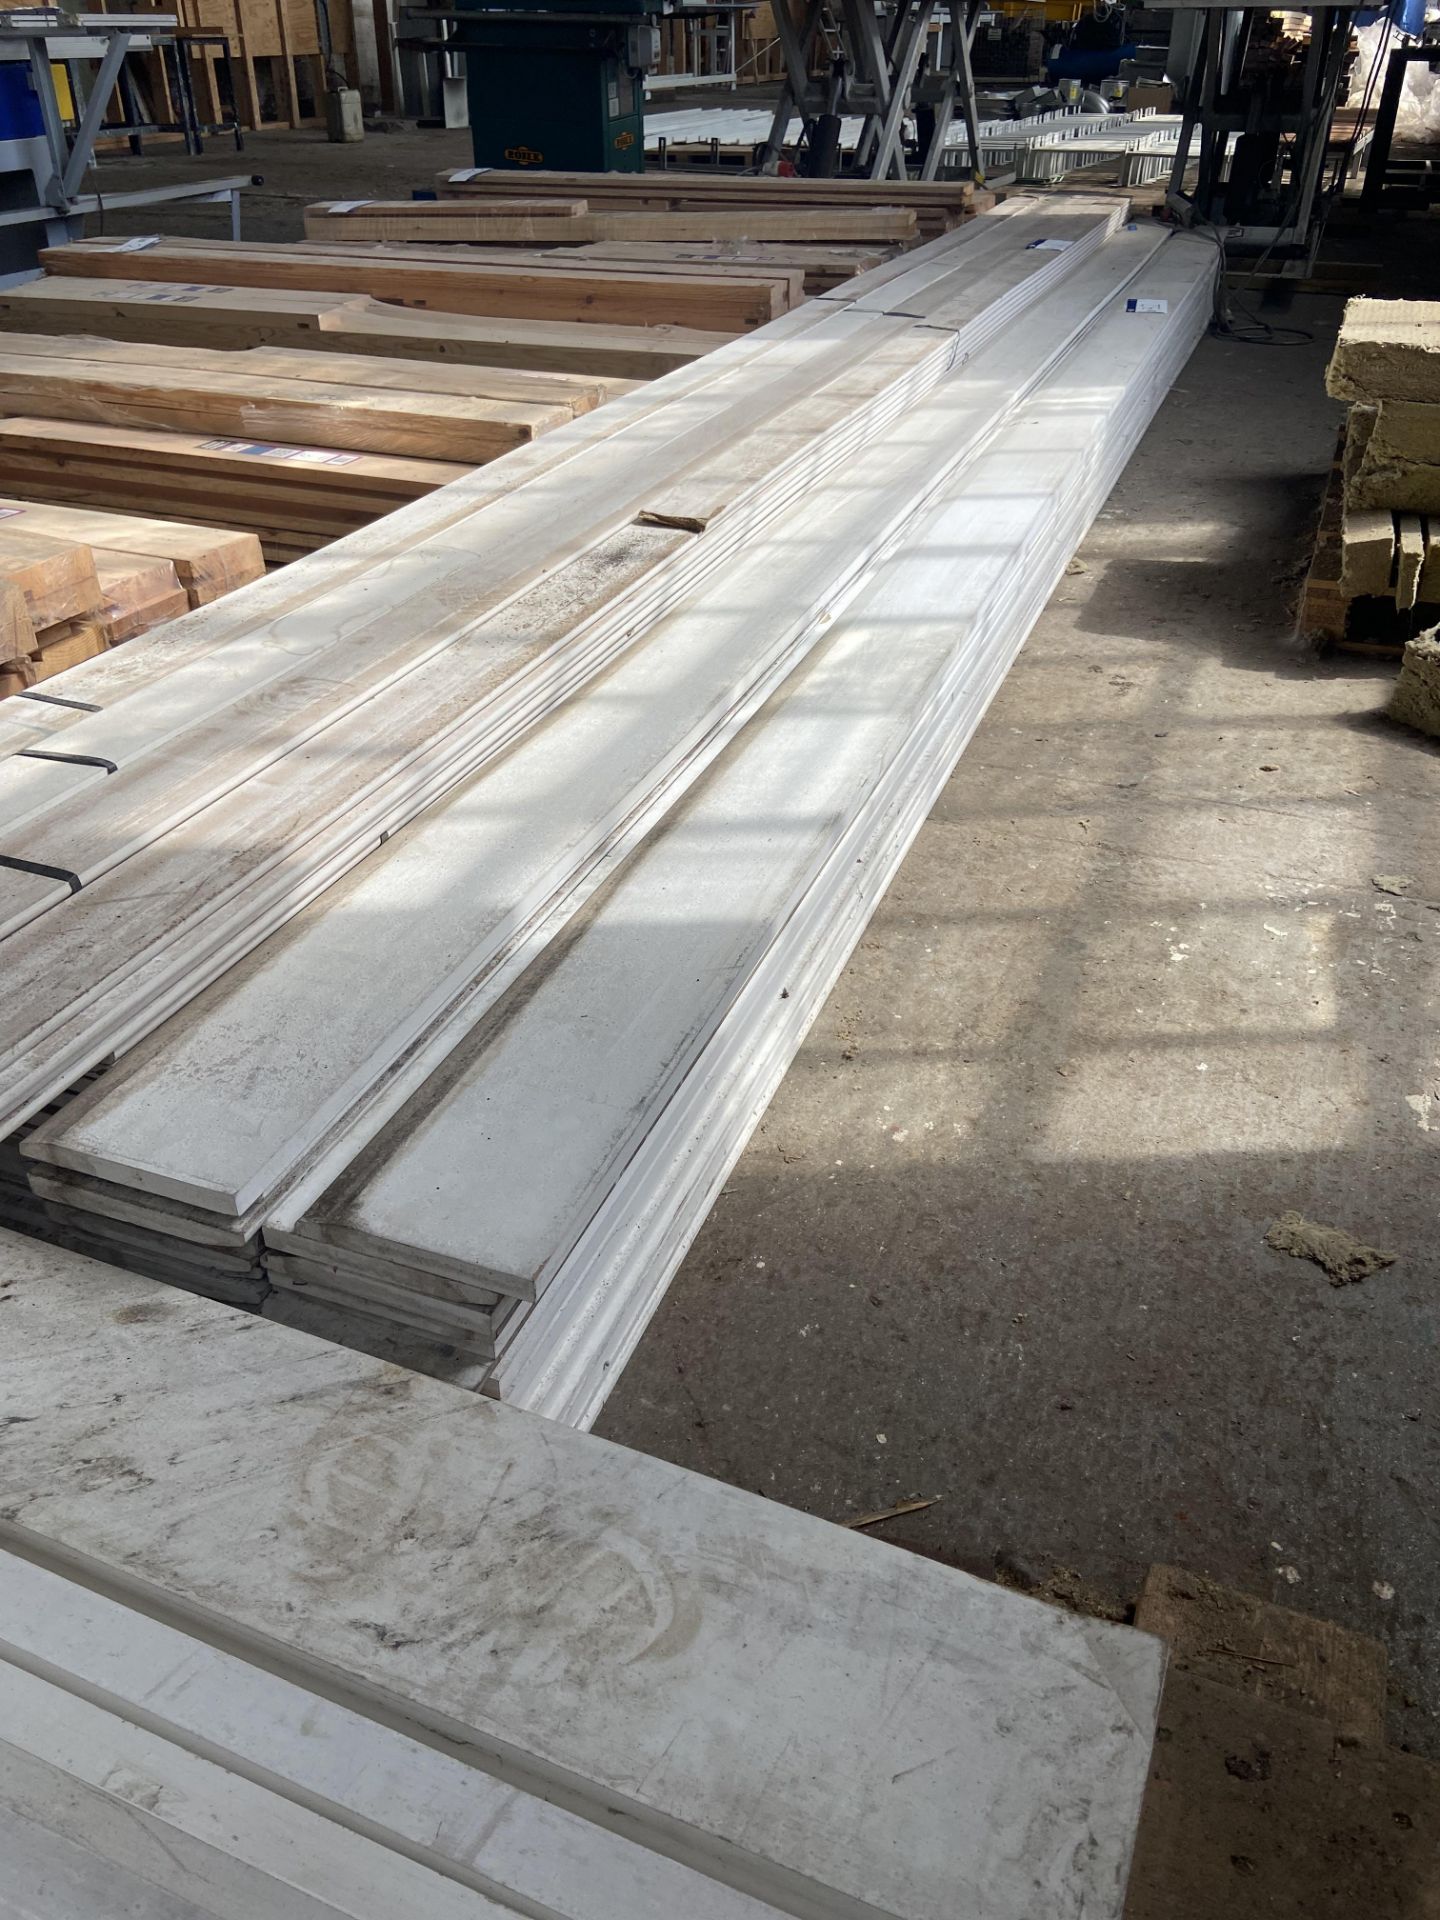 Approx. 35 Splayed Skirting Boards, each approx. 180mm x 18mm x 5.5m long Please read the